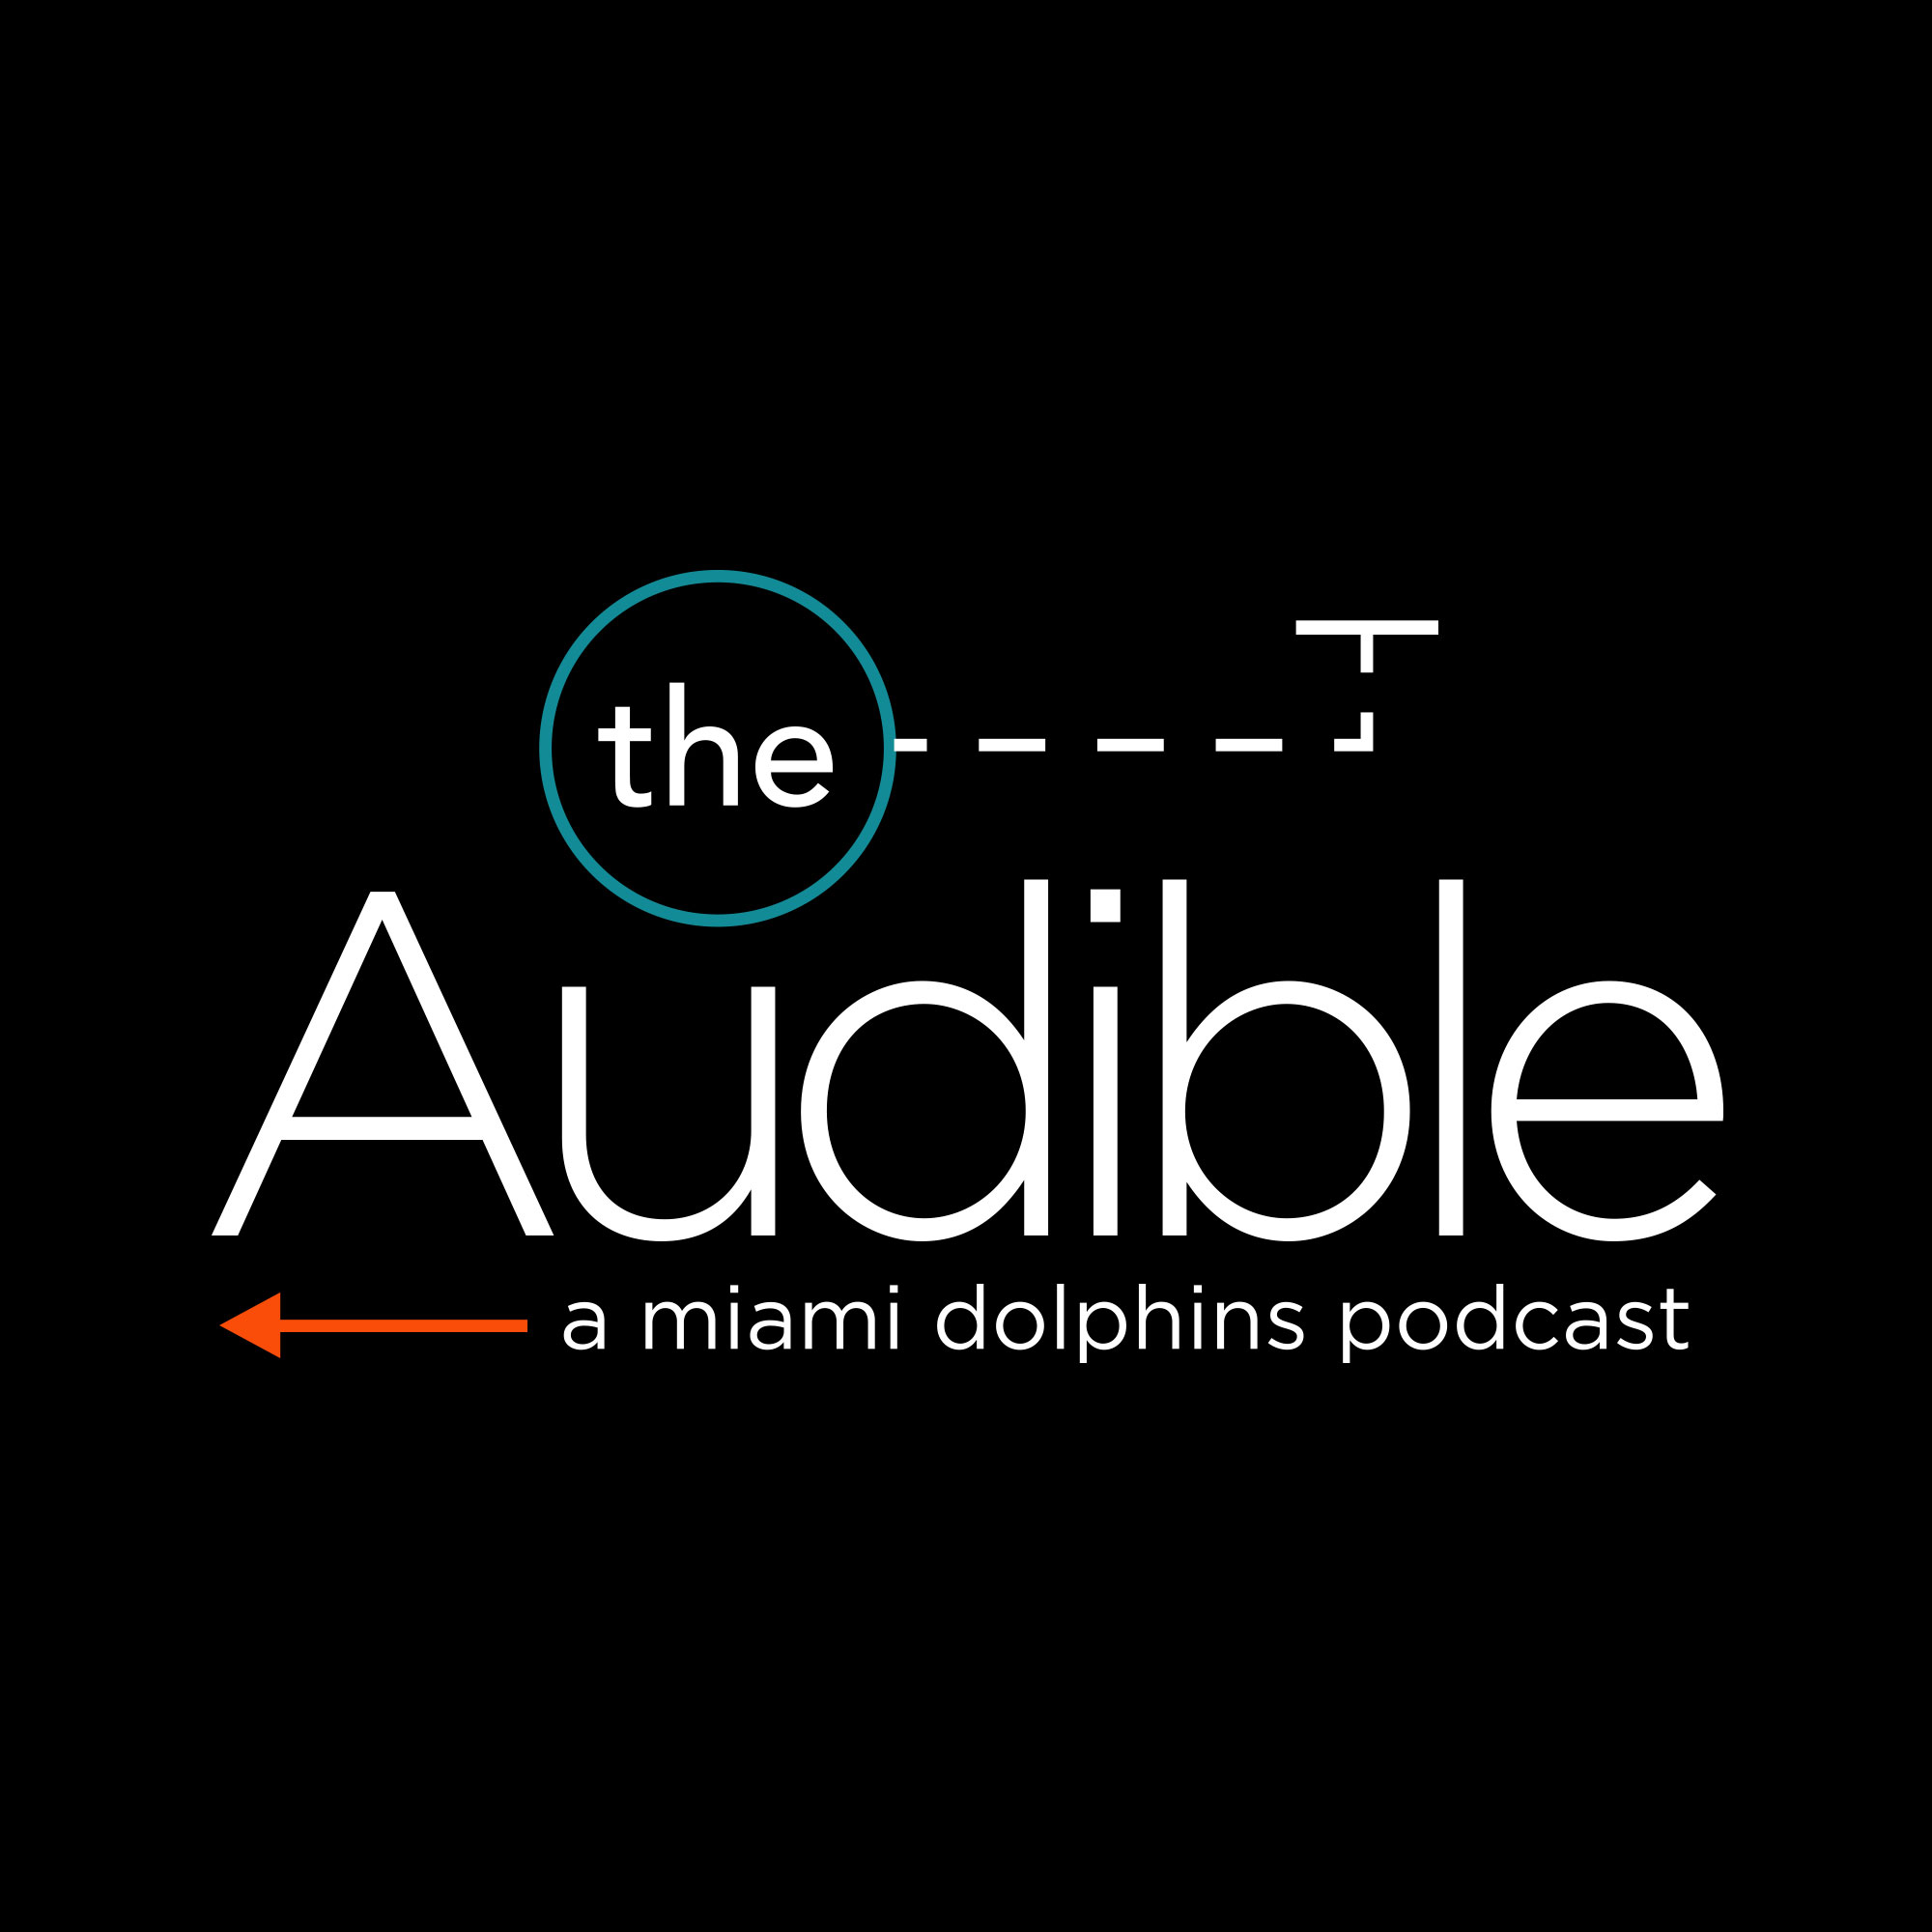 Joe Rose Joins the Show | The Audible Episode 156